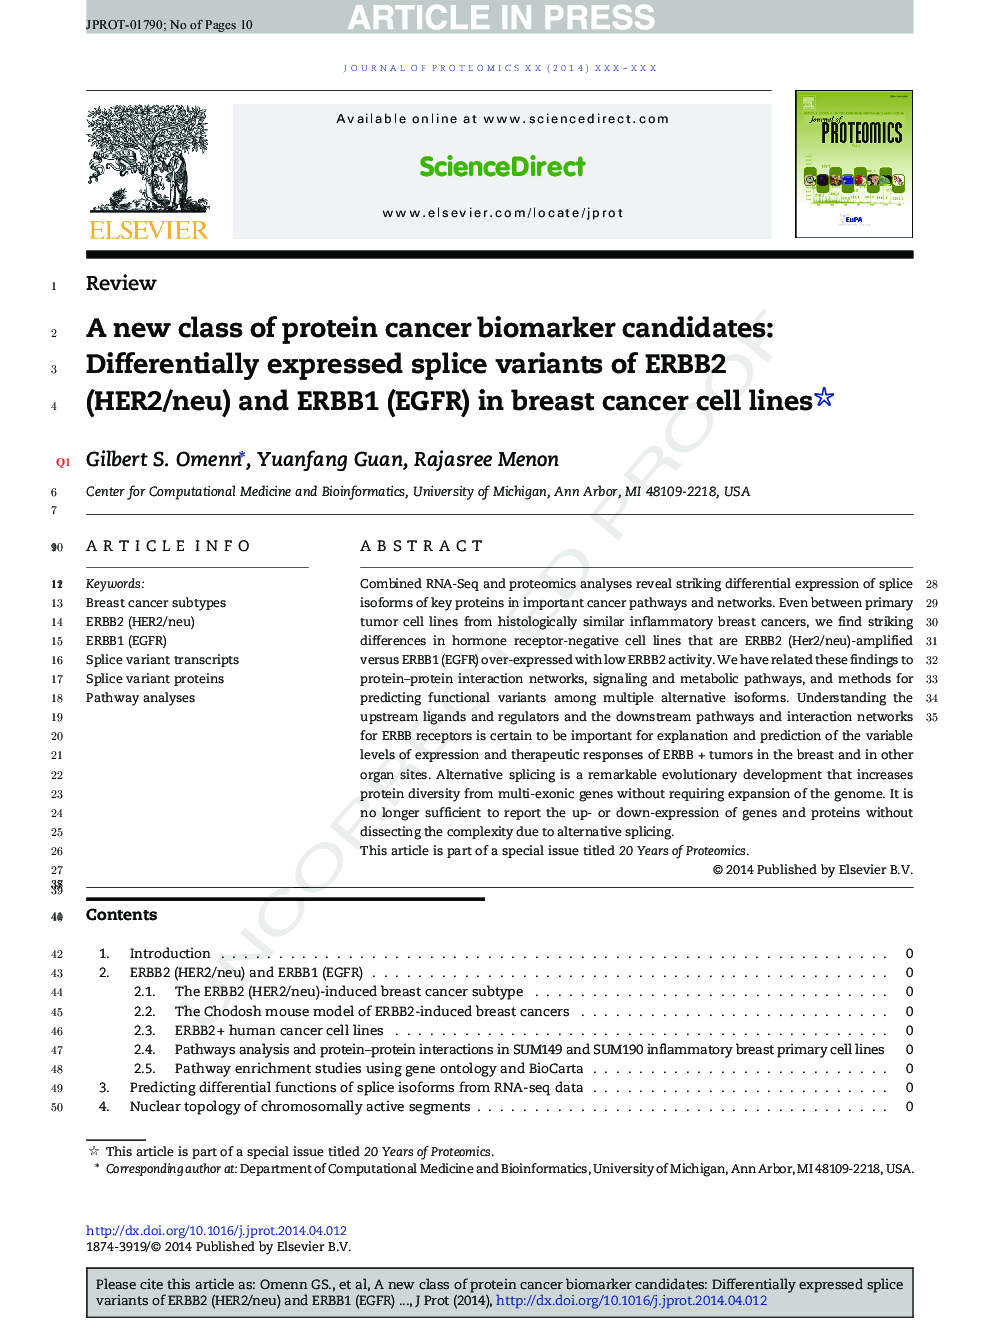 A new class of protein cancer biomarker candidates: Differentially expressed splice variants of ERBB2 (HER2/neu) and ERBB1 (EGFR) in breast cancer cell lines